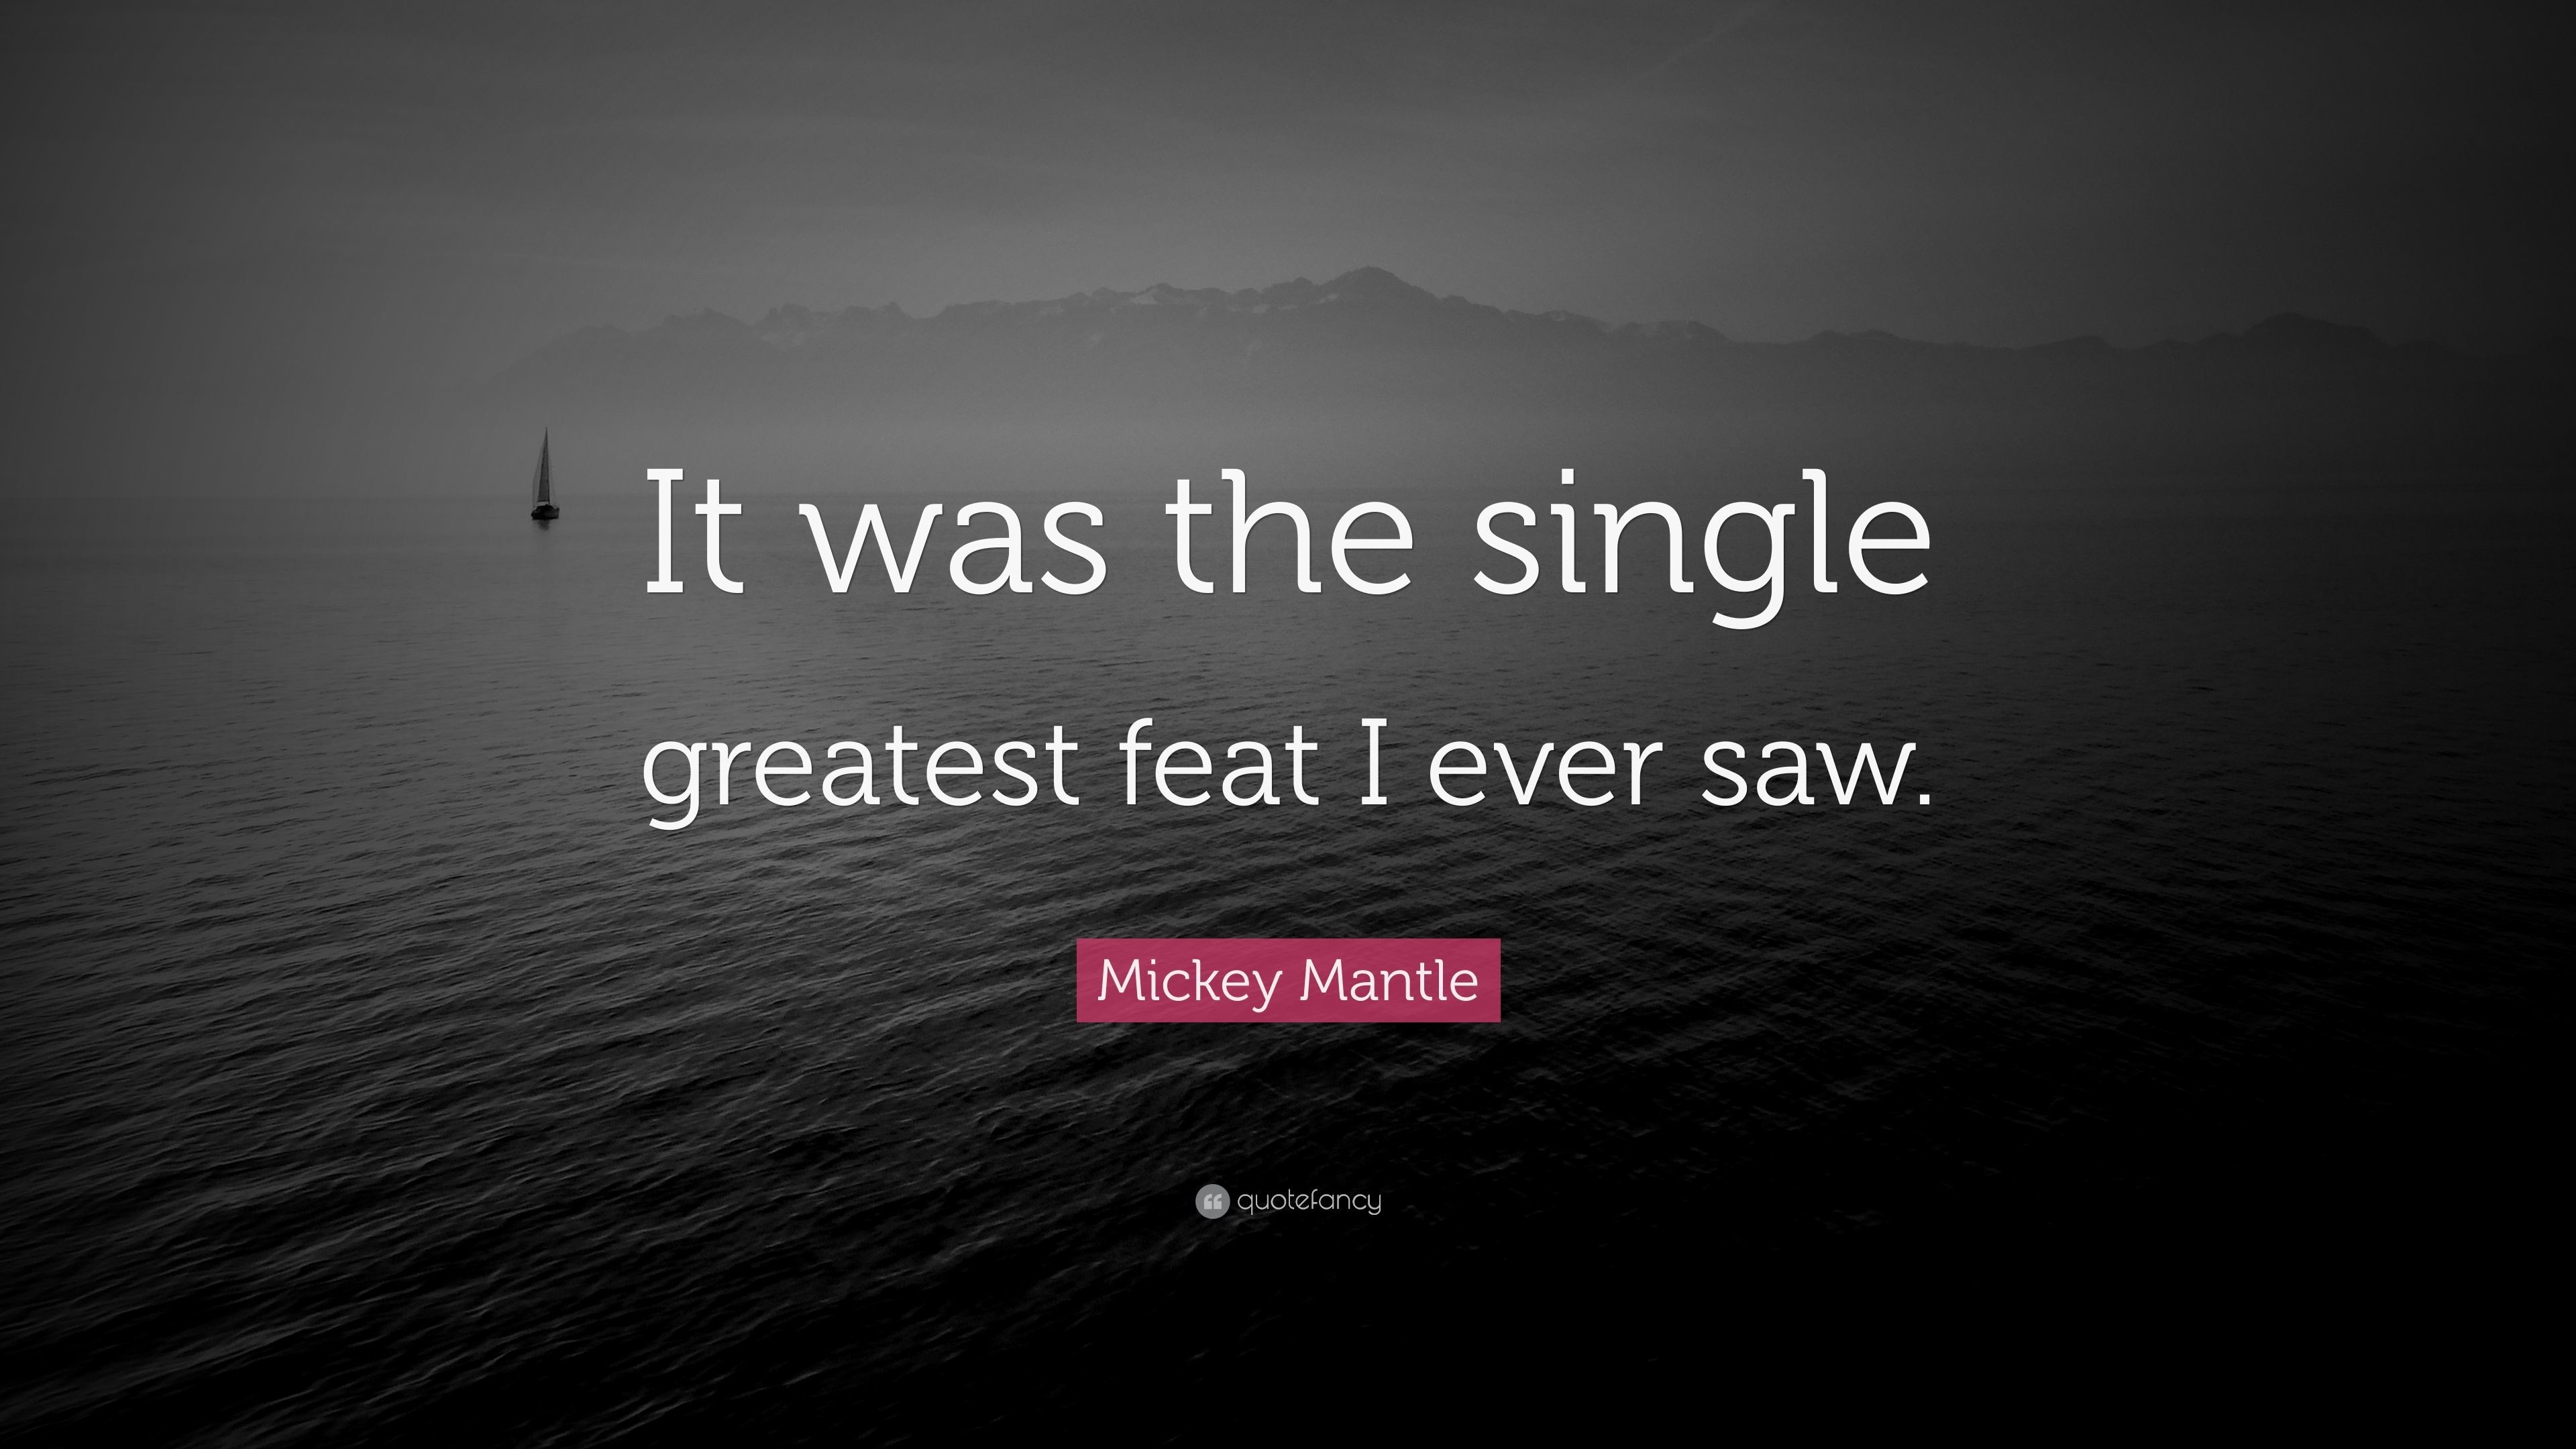 3840x2160 Mickey Mantle Quote: “It was the single greatest feat I ever saw.”